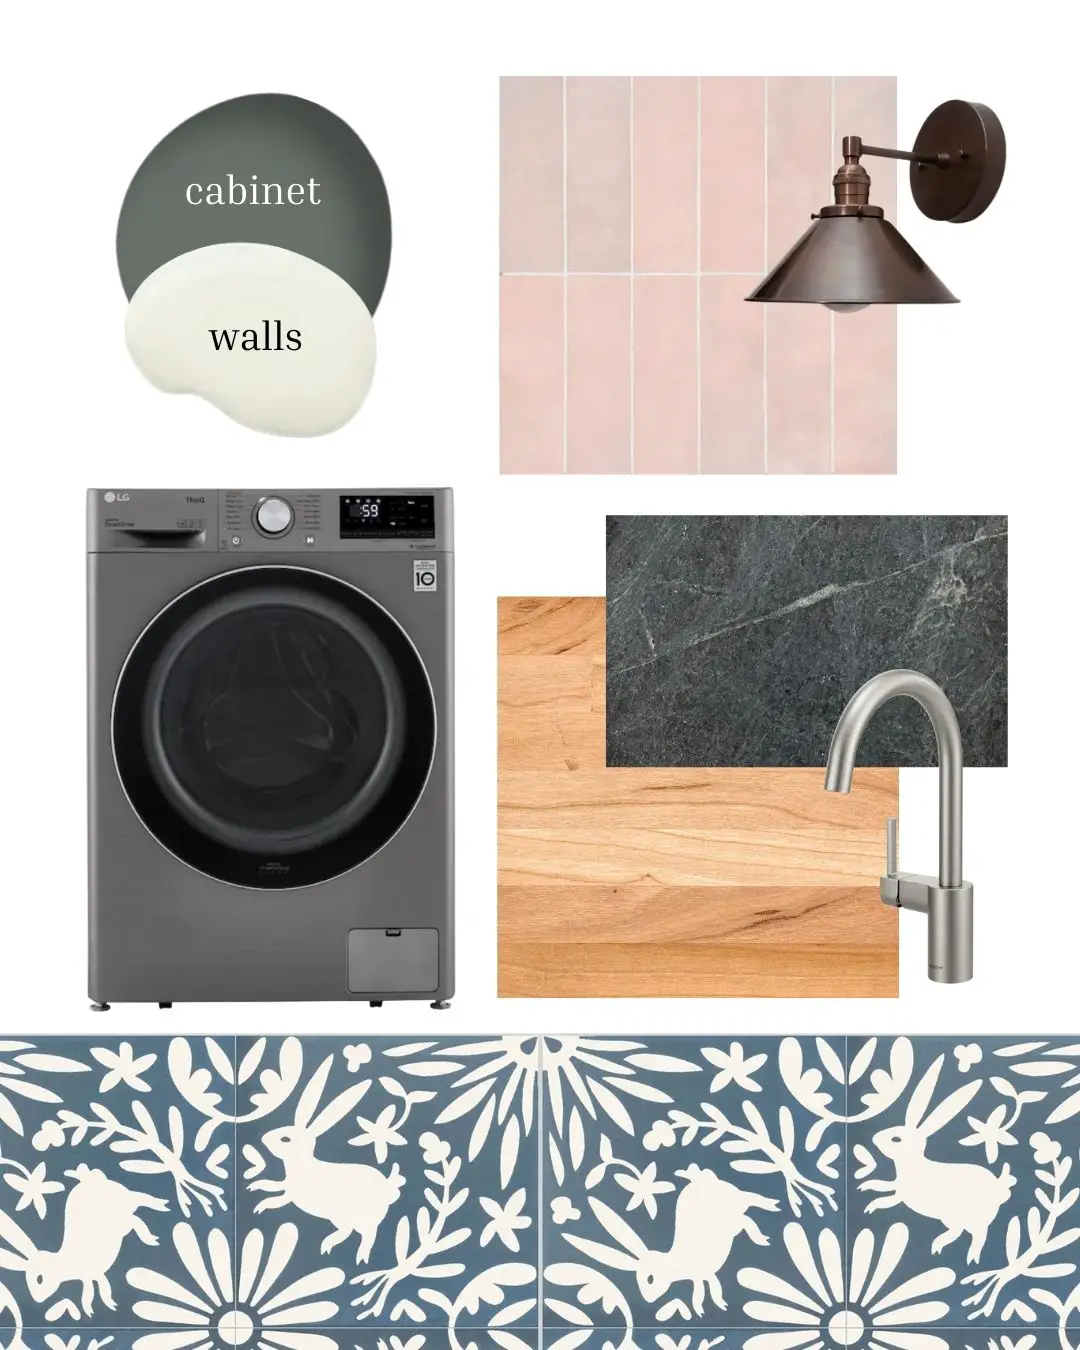 Form and Function in Our Laundry Room Design